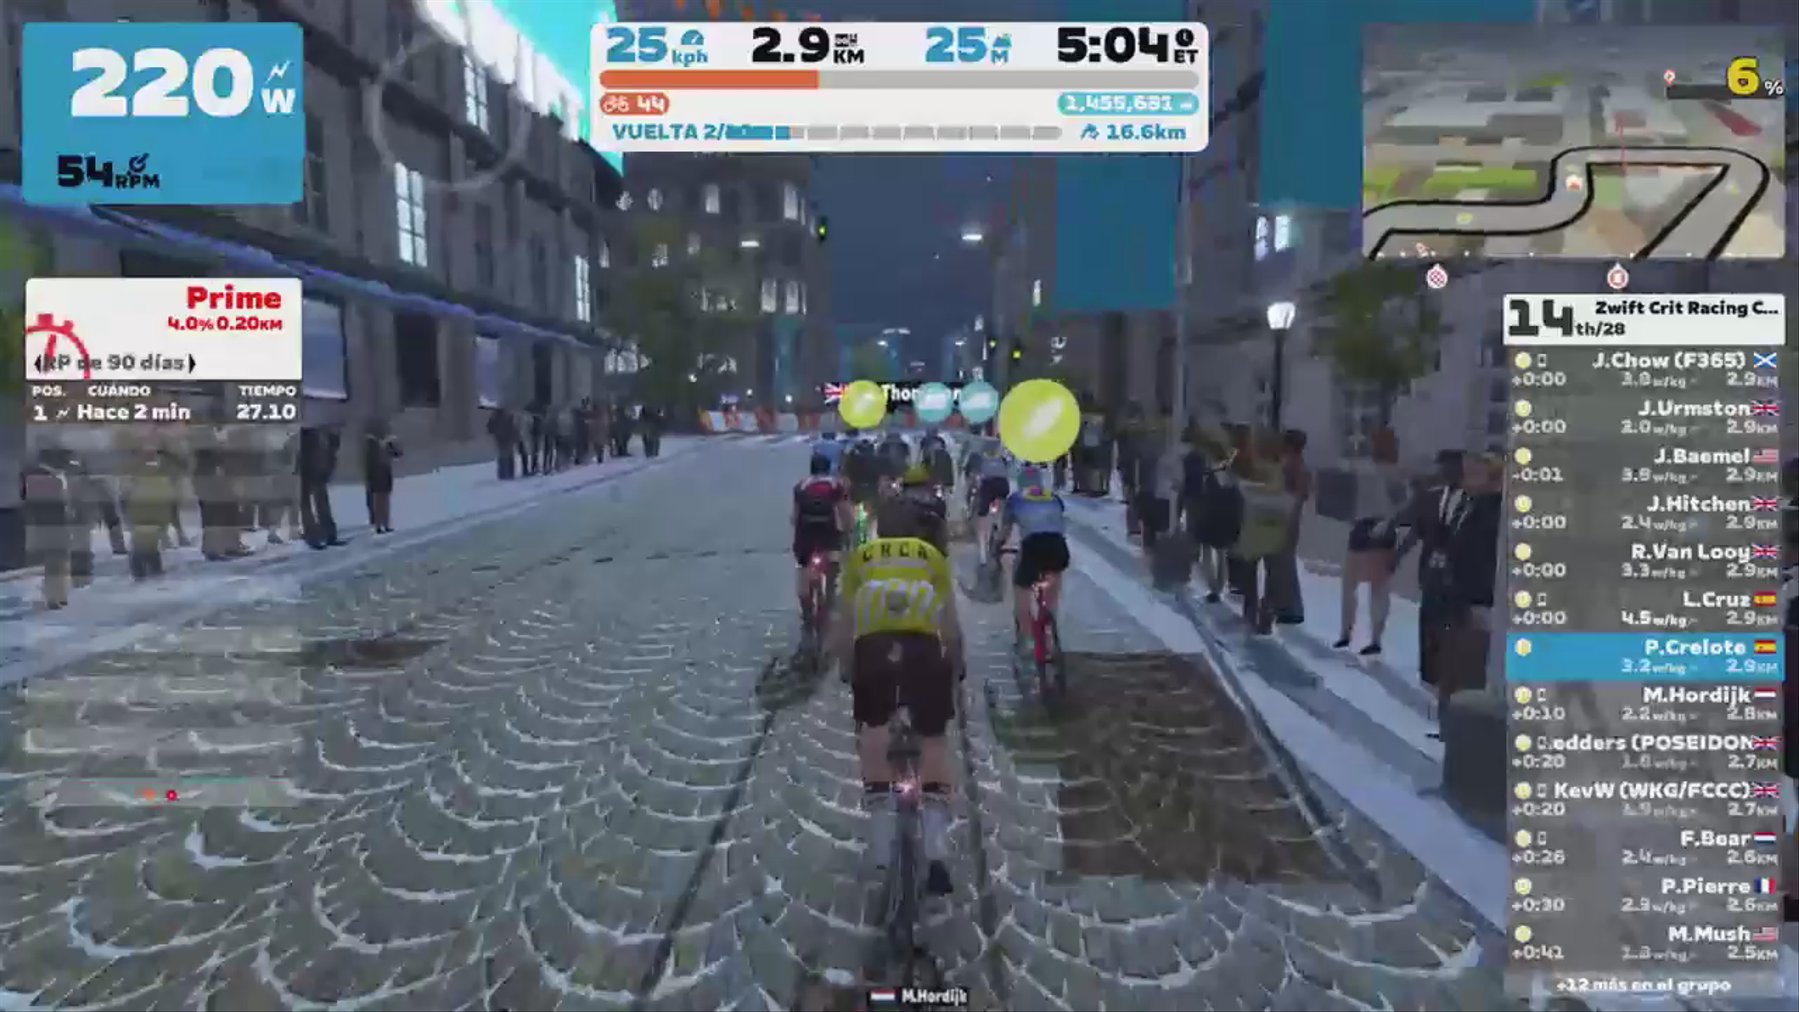 Zwift - Race: Zwift Crit Racing Club - Downtown Dolphin (D) on Downtown Dolphin in Crit City